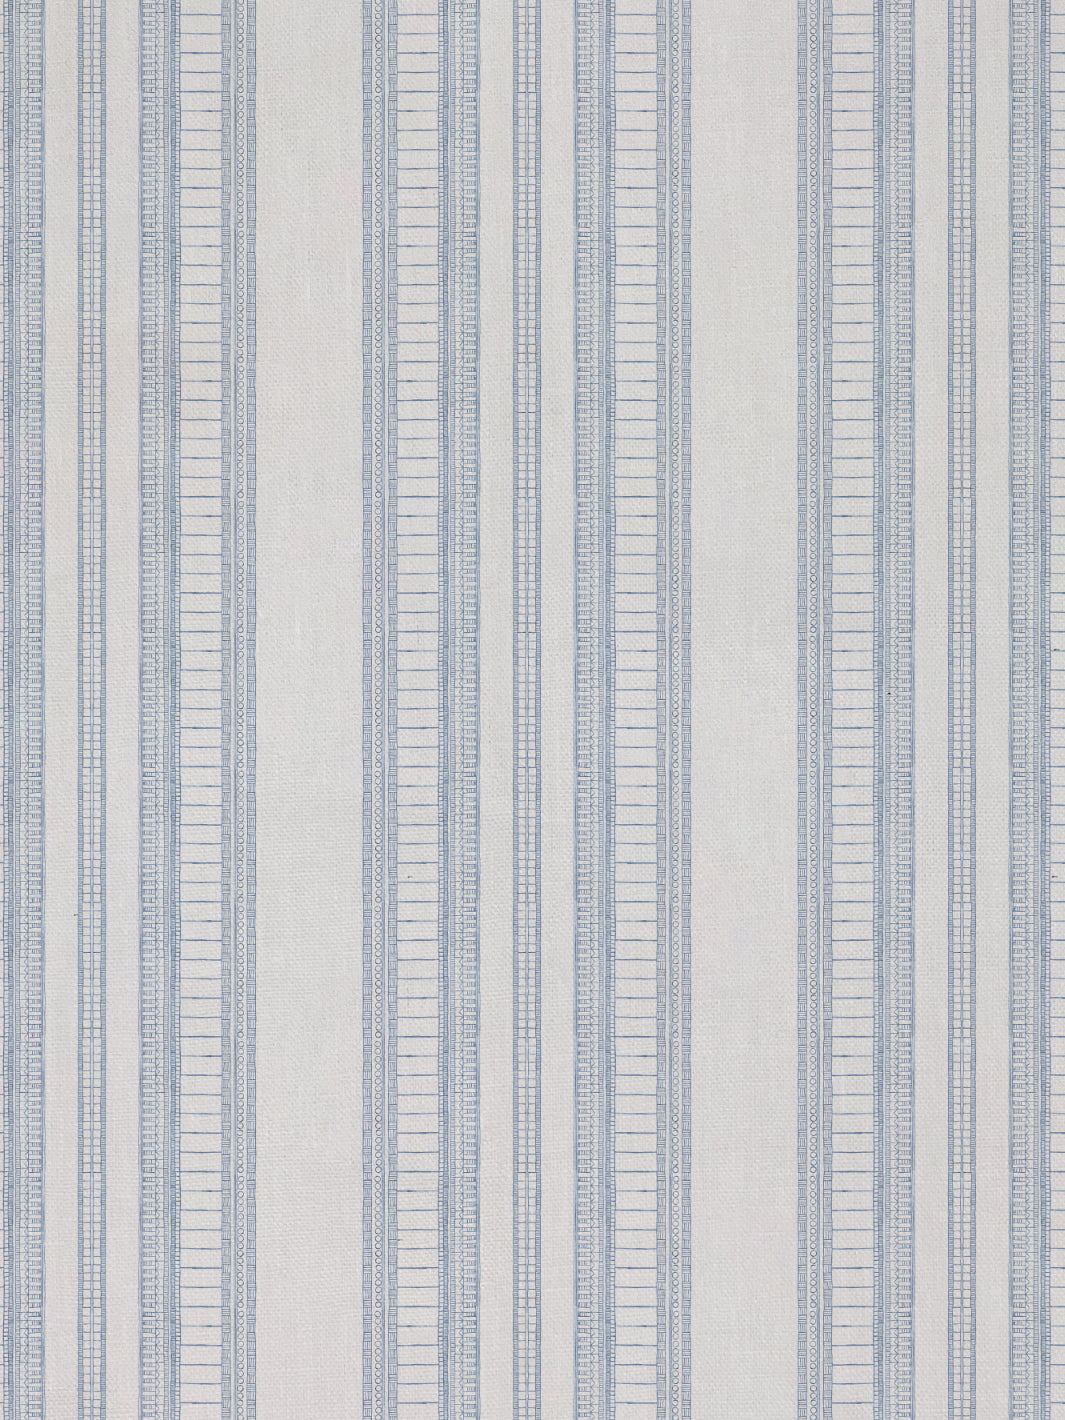 'Doodle Stripe' Linen Fabric by Nathan Turner - Blue